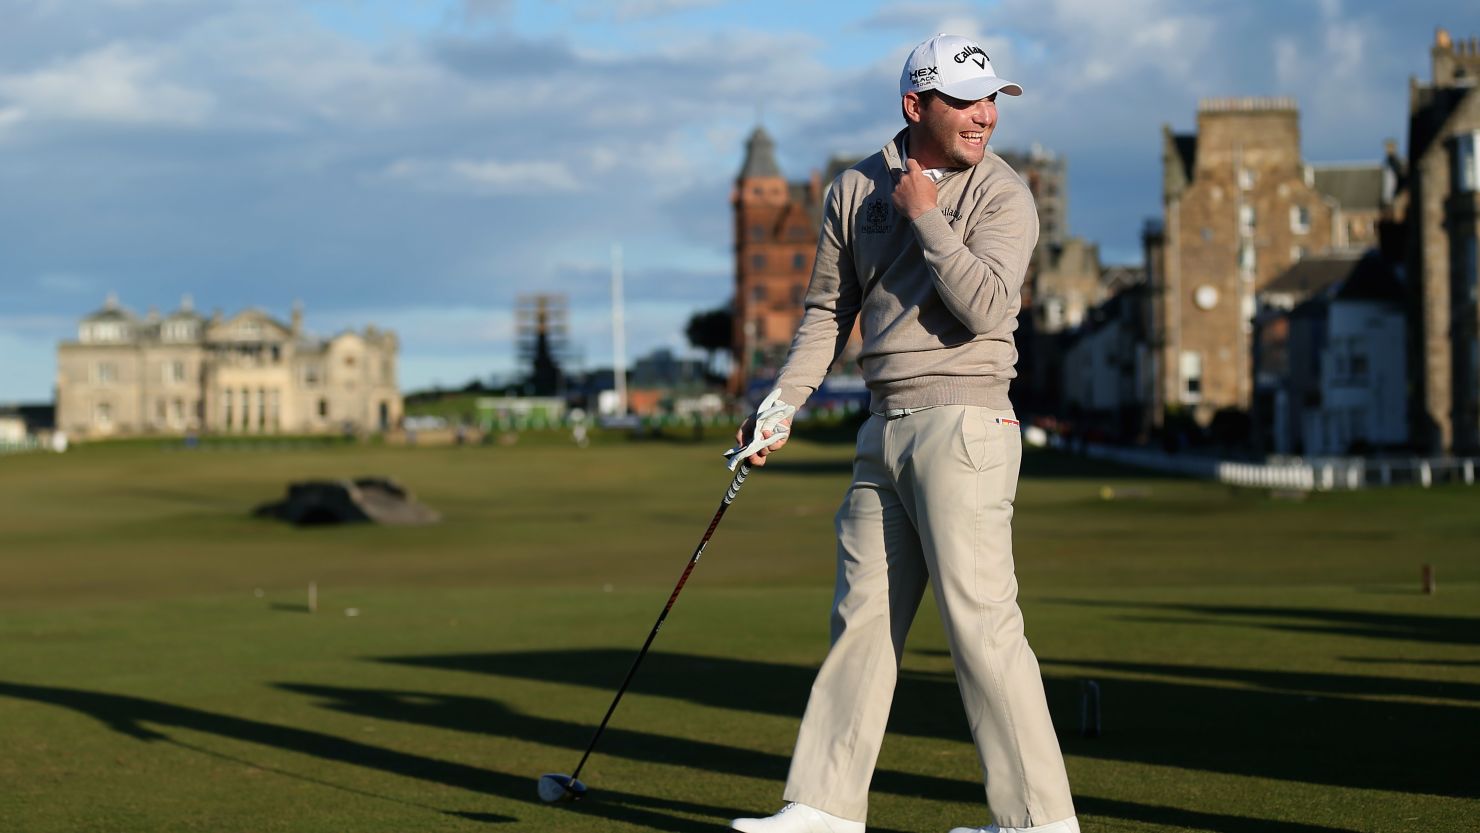 Branden Grace shares a joke before teeing off on the 18th at St Andrews which he birdied for a 67.